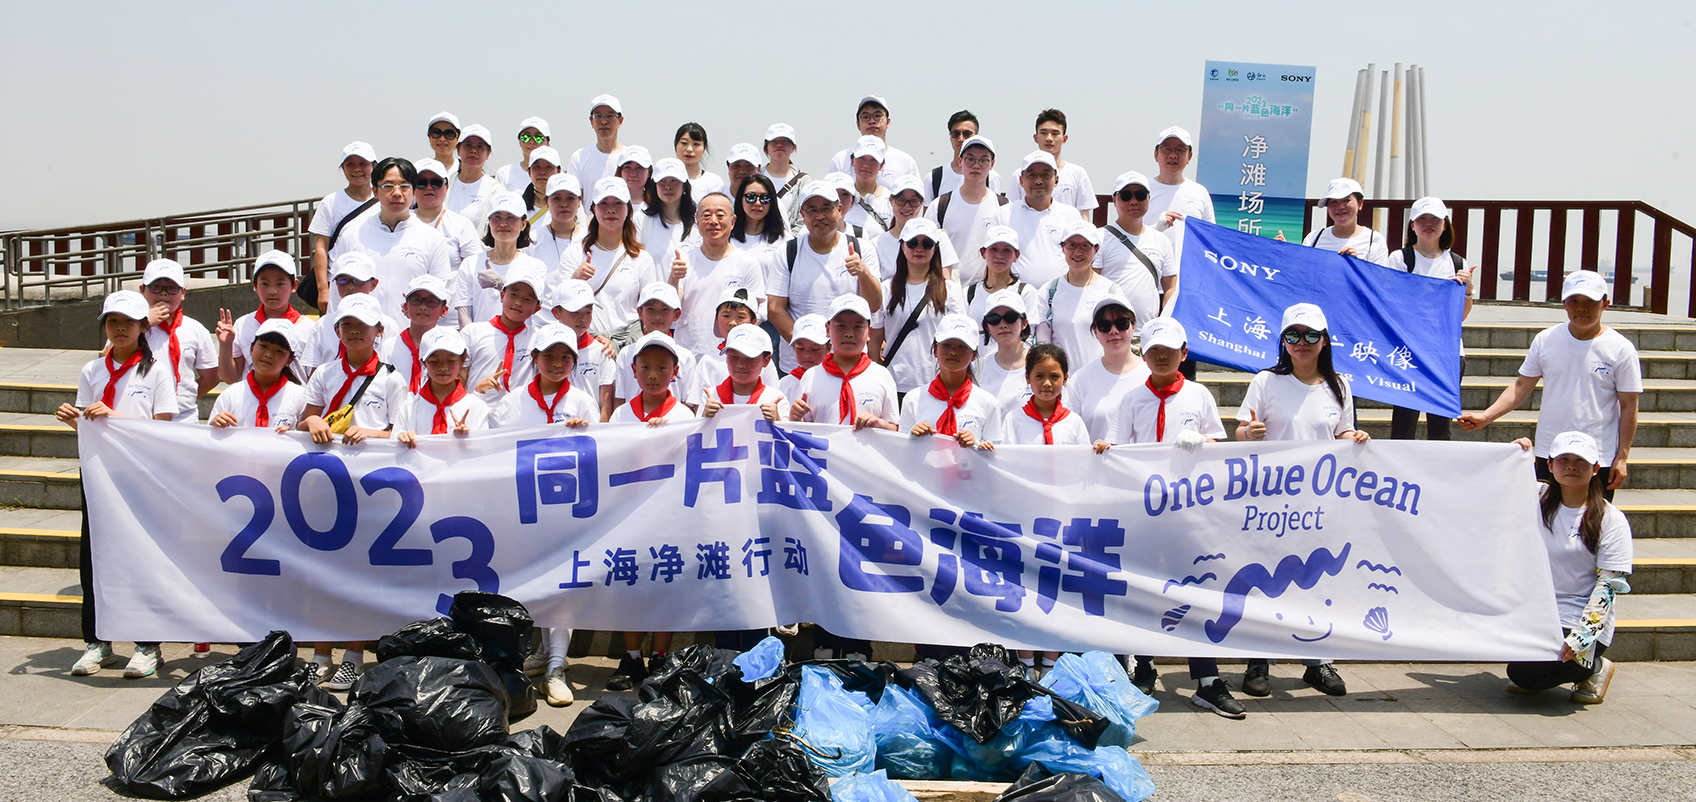 Group photo of people participating in cleanup activities